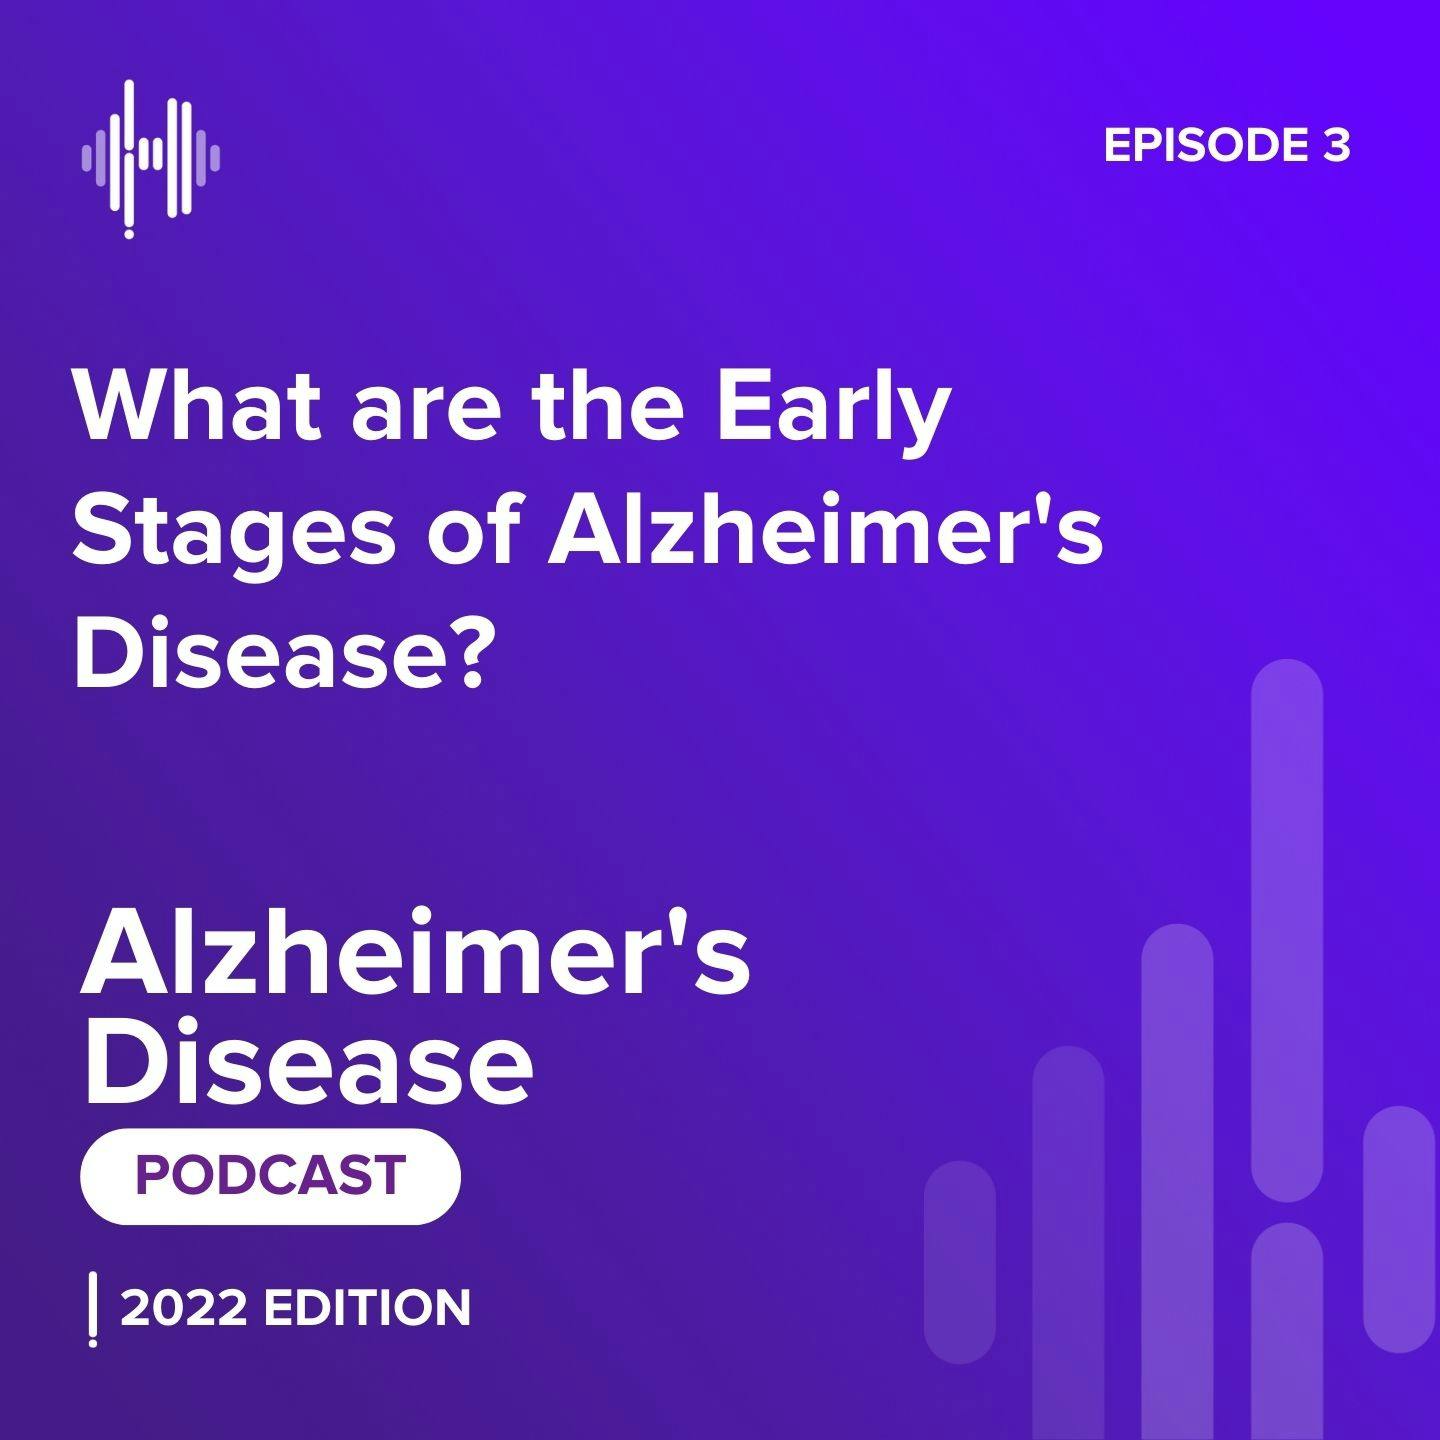 Ep 3: What are the Early Stages of Alzheimer’s Disease?